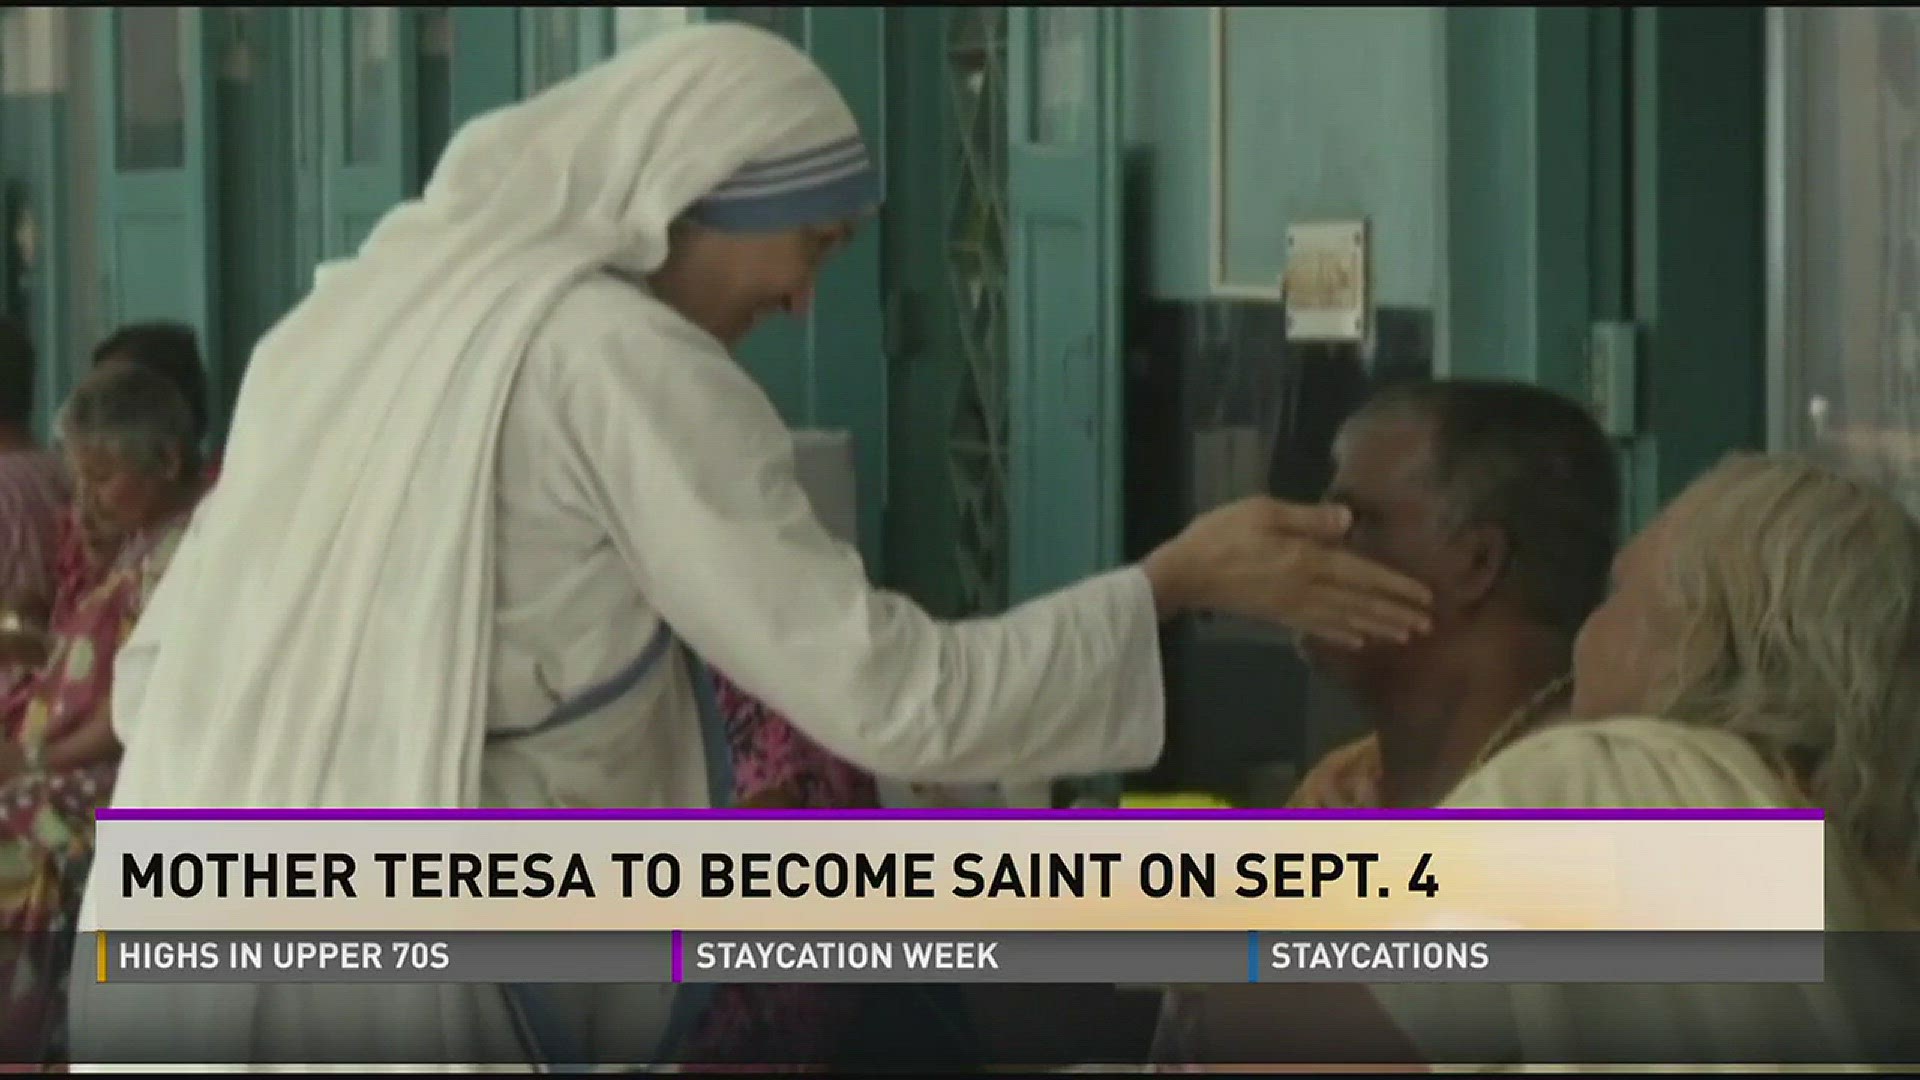 Pope Francis will sign the decree on Tuesday for the canonization of Mother Teresa.